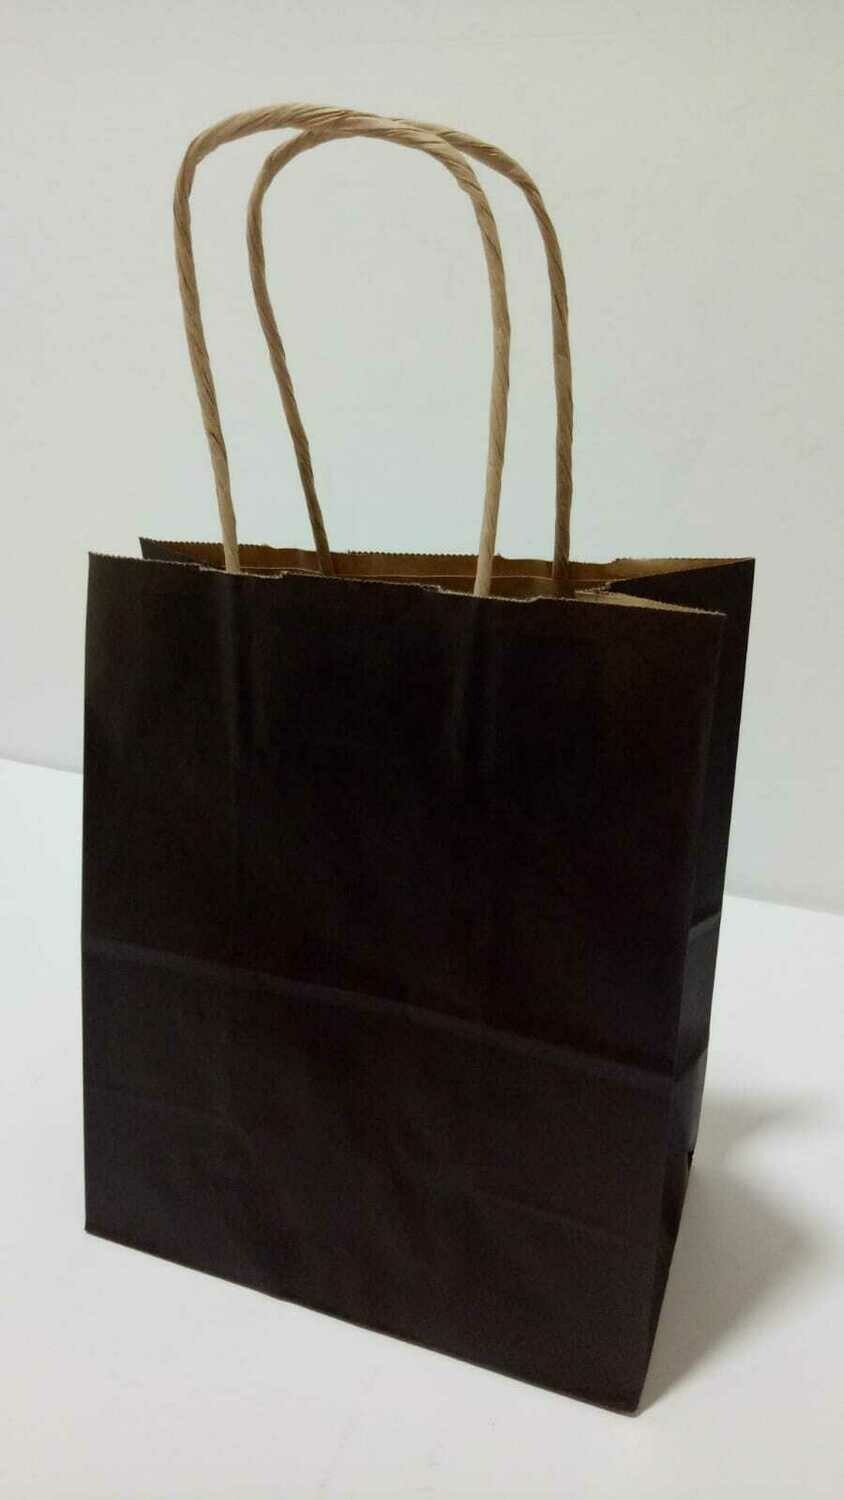 Paper Bags from Japan